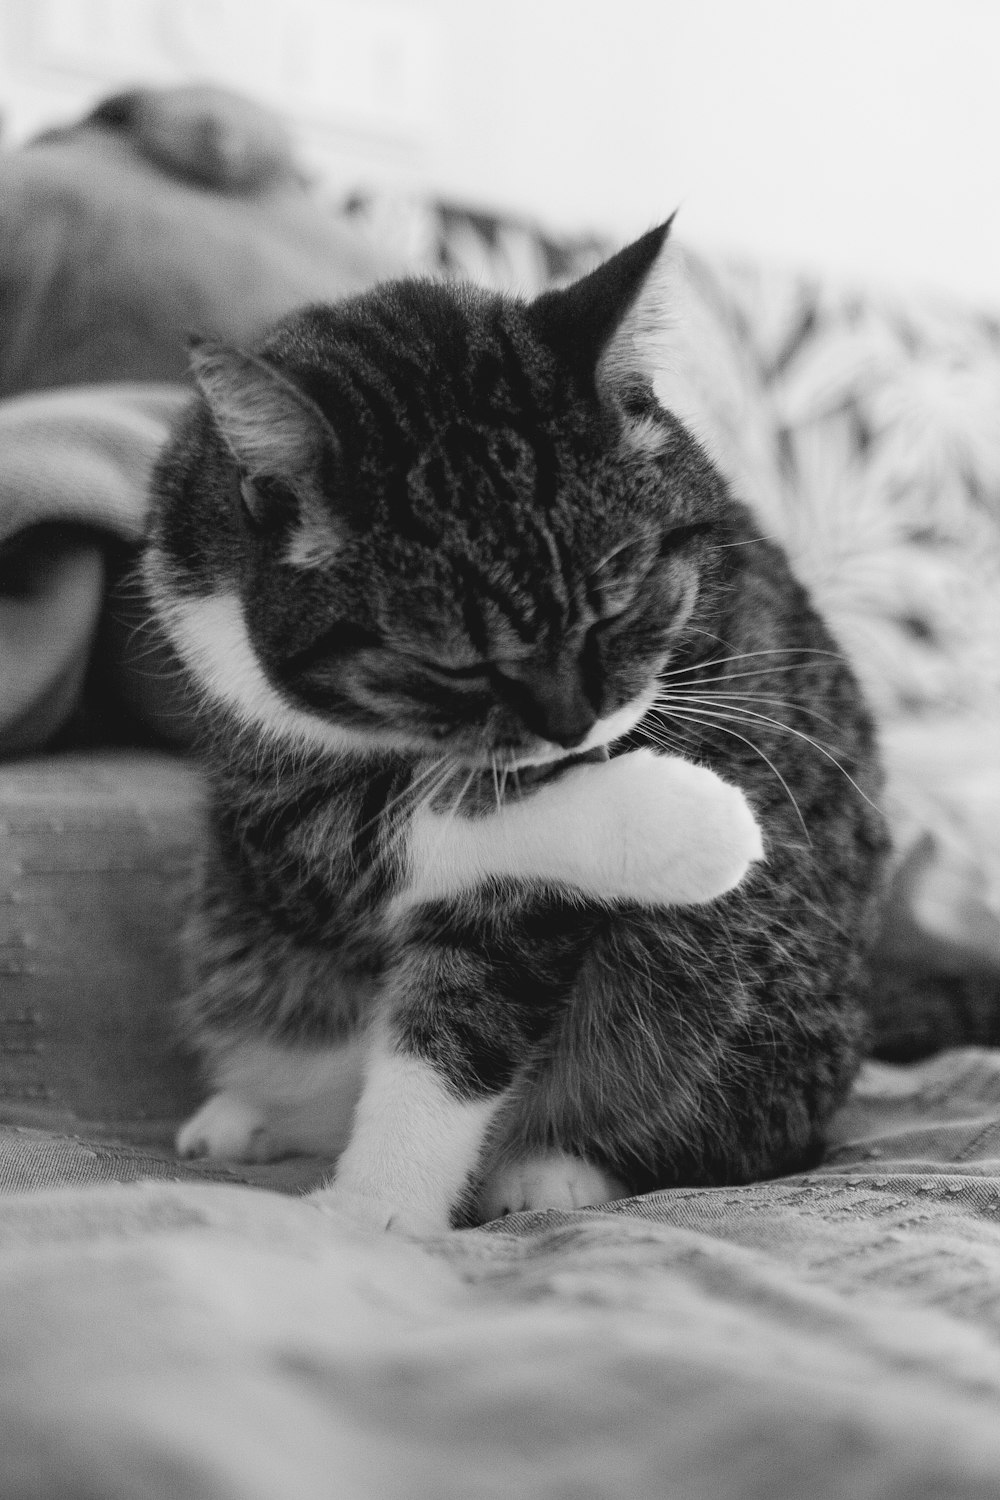 a black and white photo of a cat sitting on a bed